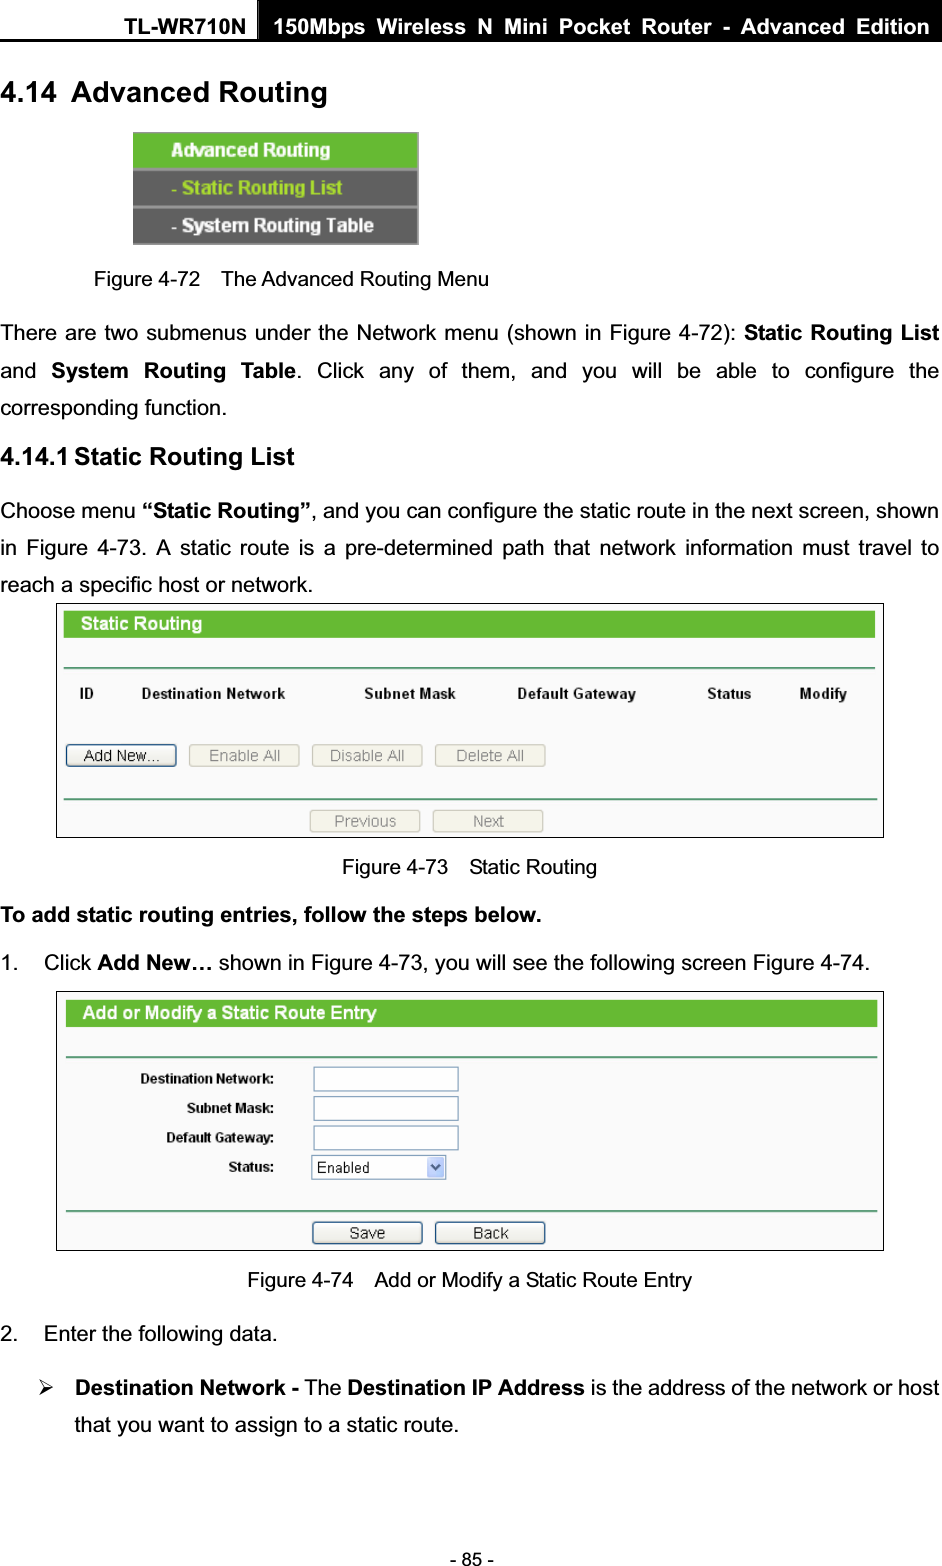 TL-WR710N  150Mbps Wireless N Mini Pocket Router - Advanced Edition- 85 - 4.14 Advanced Routing Figure 4-72  The Advanced Routing Menu There are two submenus under the Network menu (shown in Figure 4-72): Static Routing Listand SystemRouting Table. Click any of them, and you will be able to configure the corresponding function. 4.14.1 Static Routing List Choose menu “Static Routing”, and you can configure the static route in the next screen, shown in Figure 4-73. A static route is a pre-determined path that network information must travel to reach a specific host or network. Figure 4-73  Static Routing To add static routing entries, follow the steps below. 1. Click Add New… shown in Figure 4-73, you will see the following screen Figure 4-74.   Figure 4-74    Add or Modify a Static Route Entry 2.  Enter the following data. ¾Destination Network - The Destination IP Address is the address of the network or host that you want to assign to a static route. 